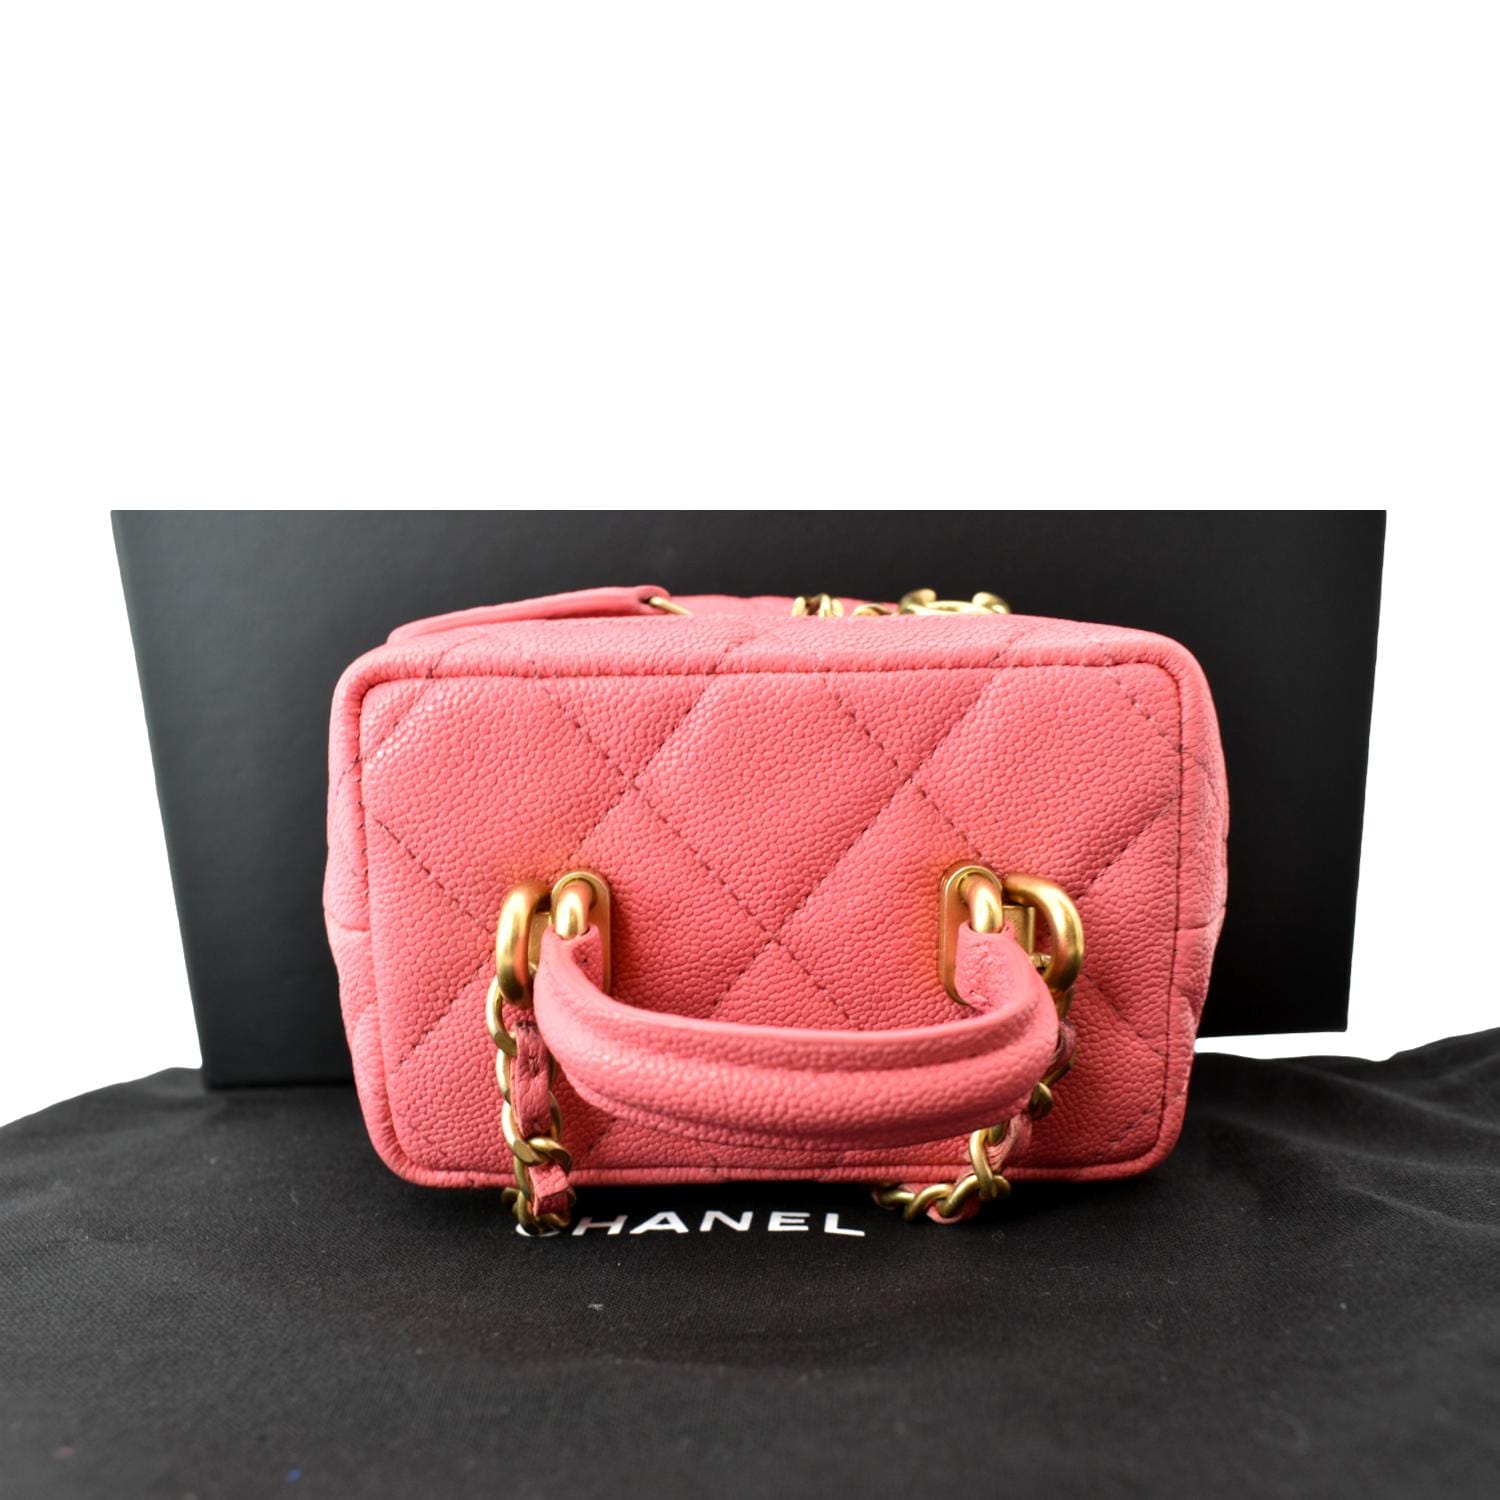 chanel pink quilted bag  Bags, Pink chanel bag, Chanel bag